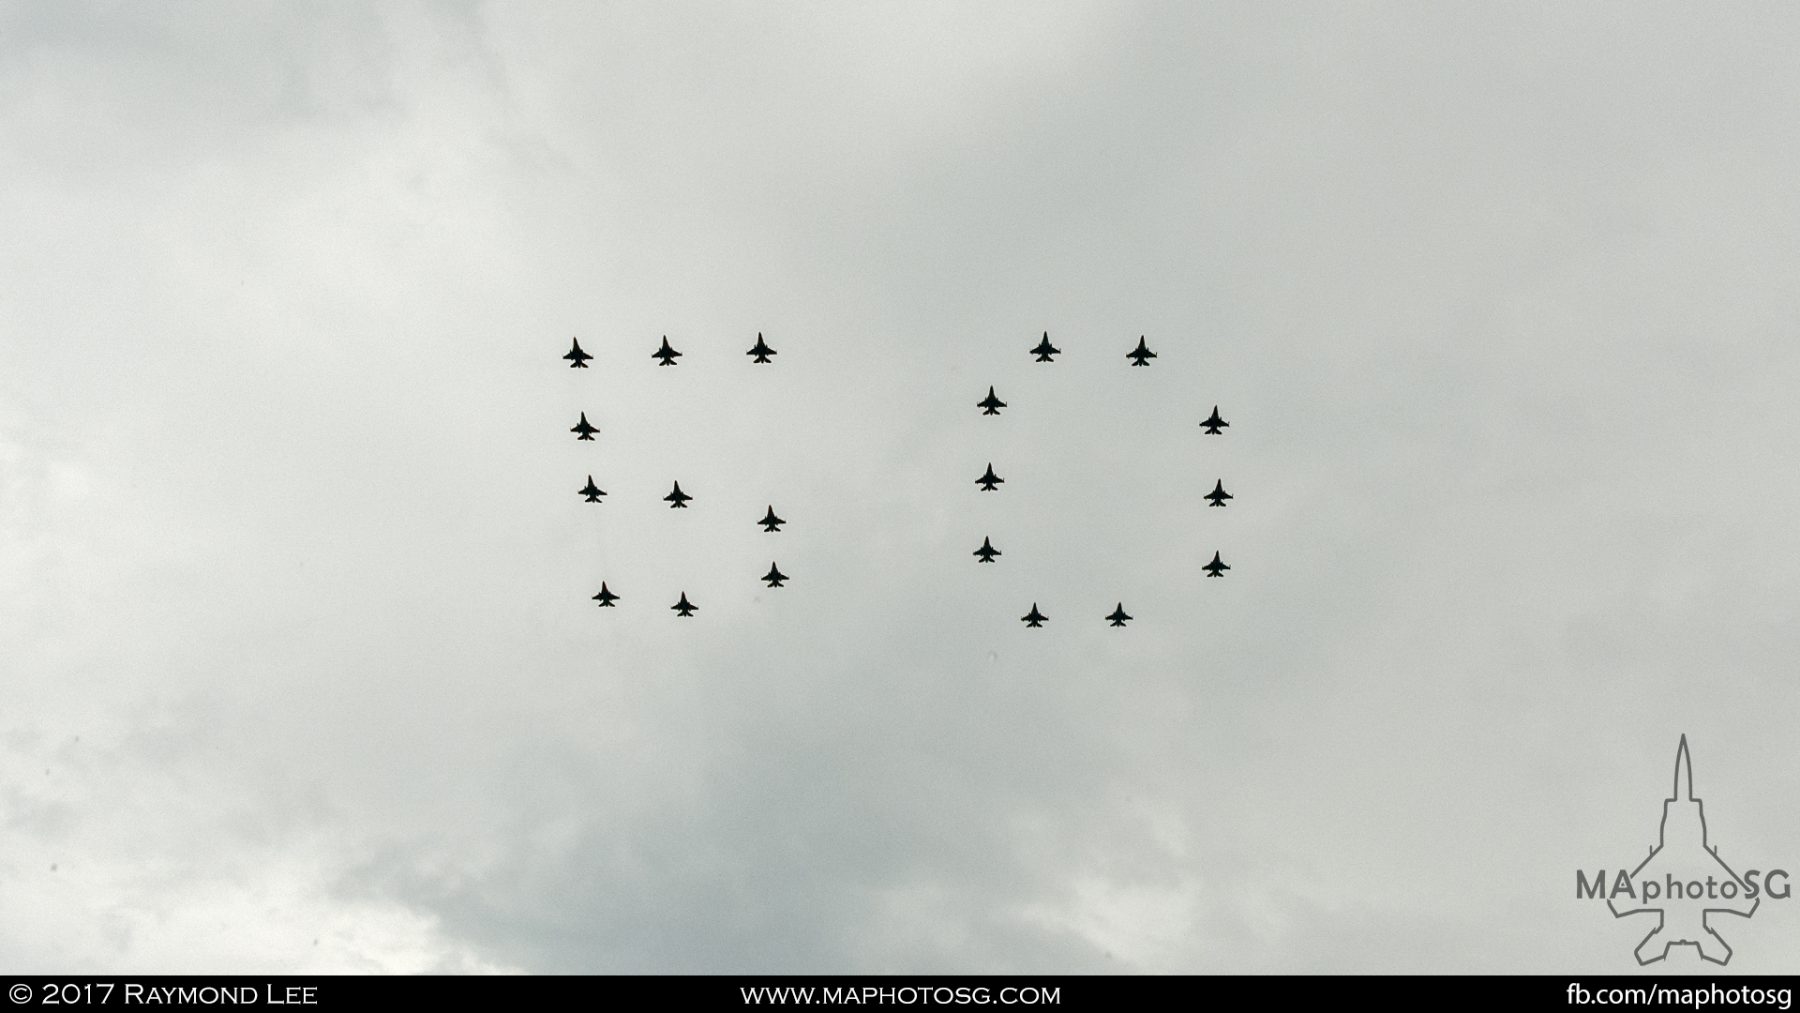 "50" formation